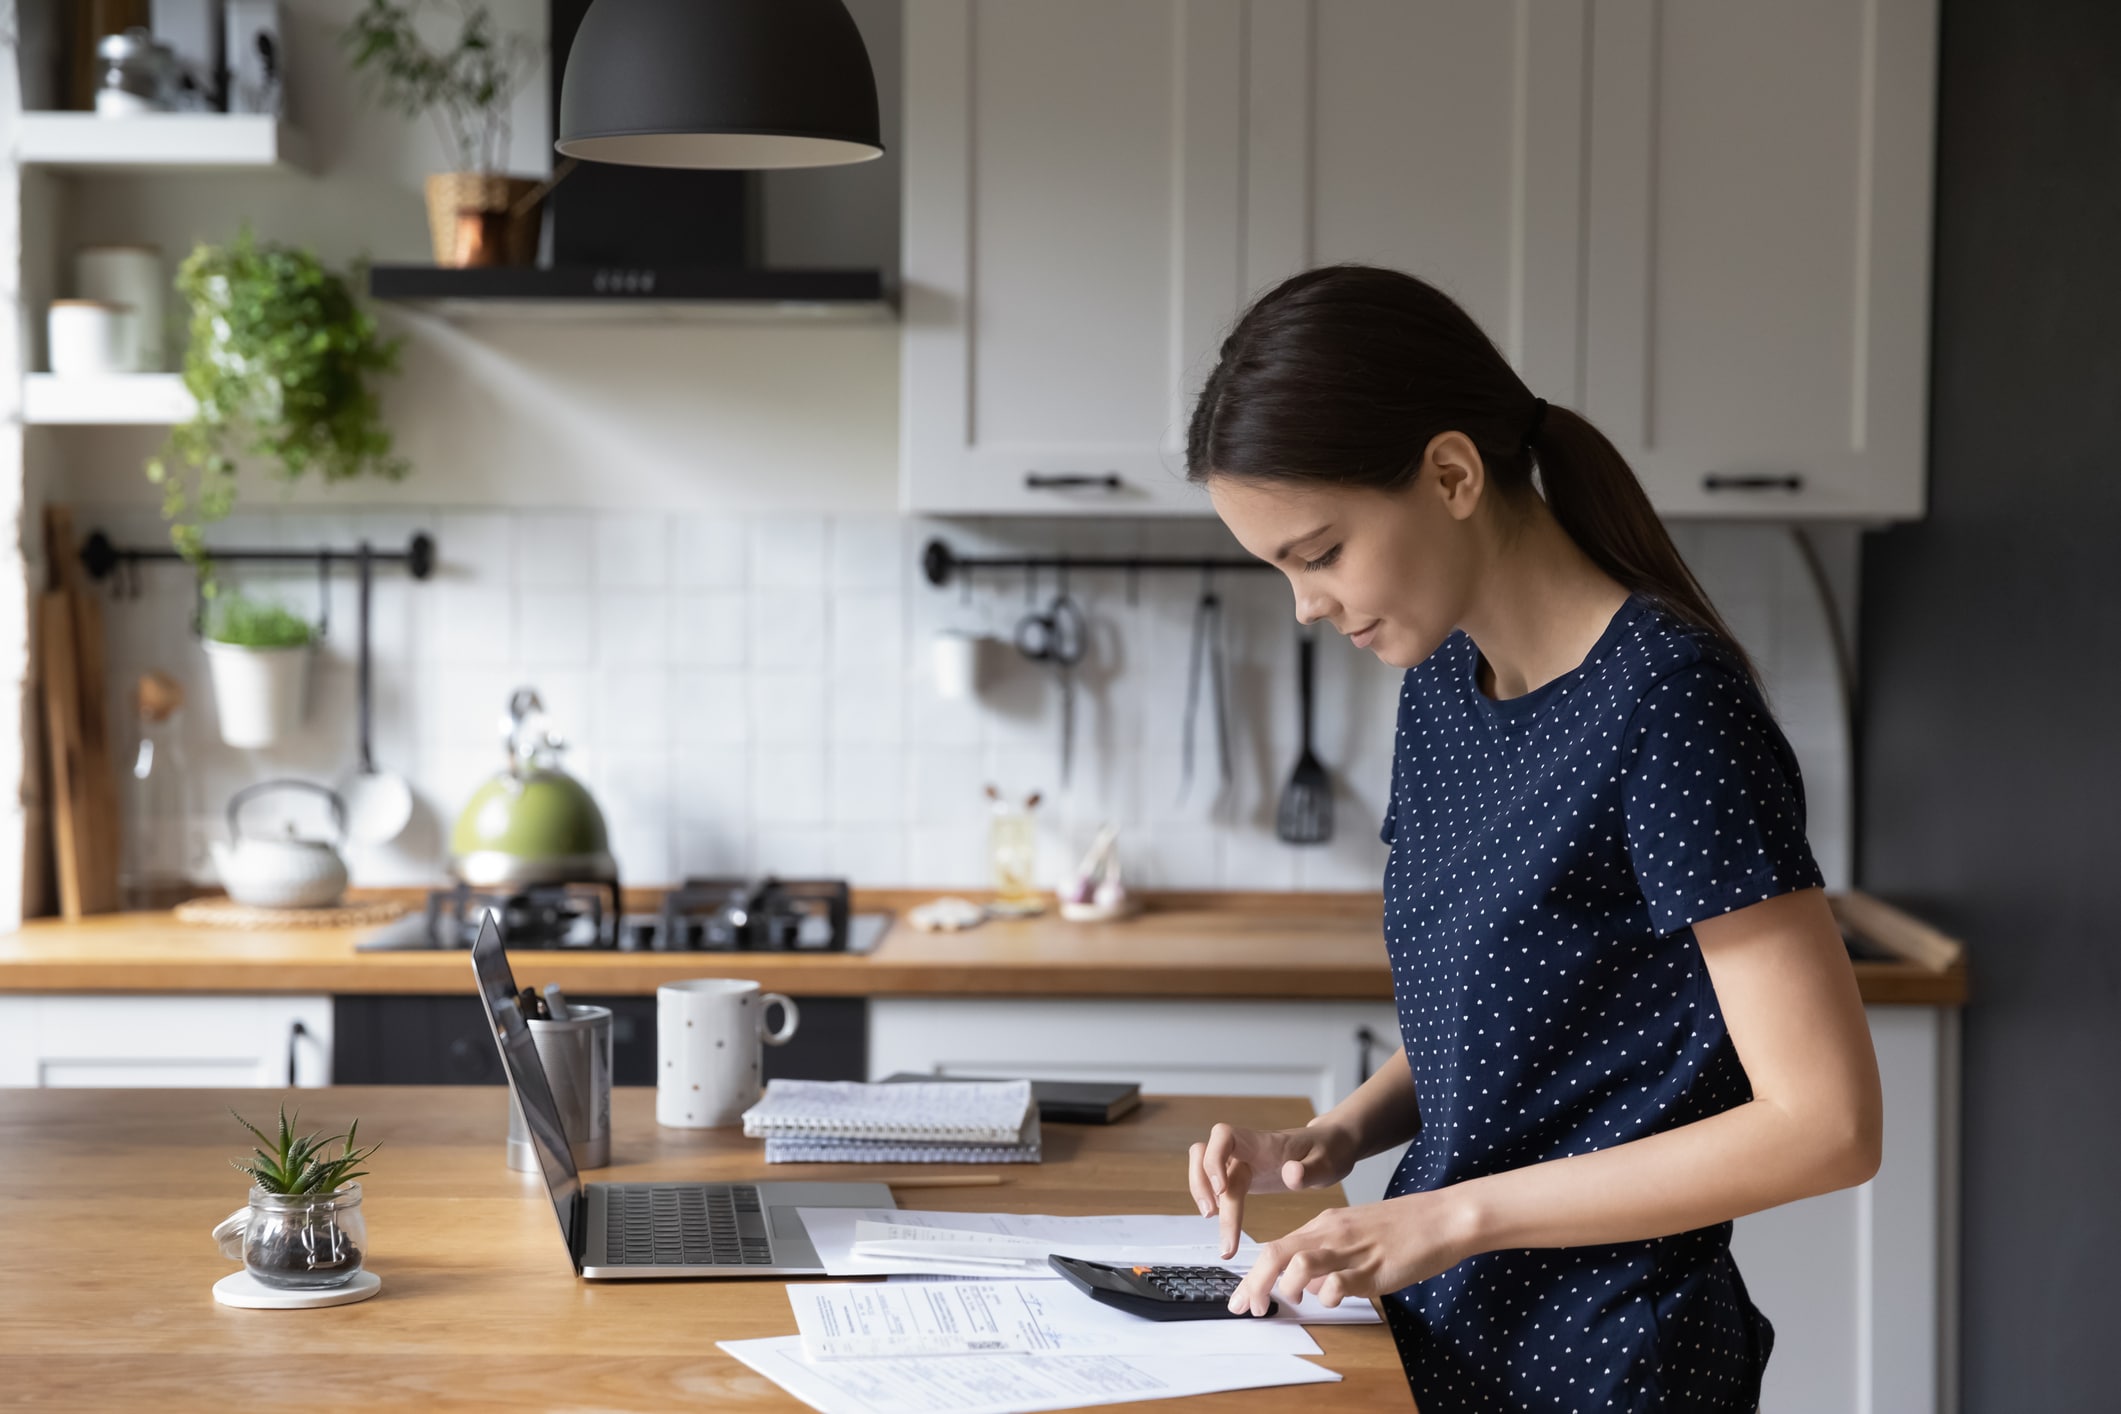 understanding your annual expenses. Woman at kitchen counter with computer and calculator.